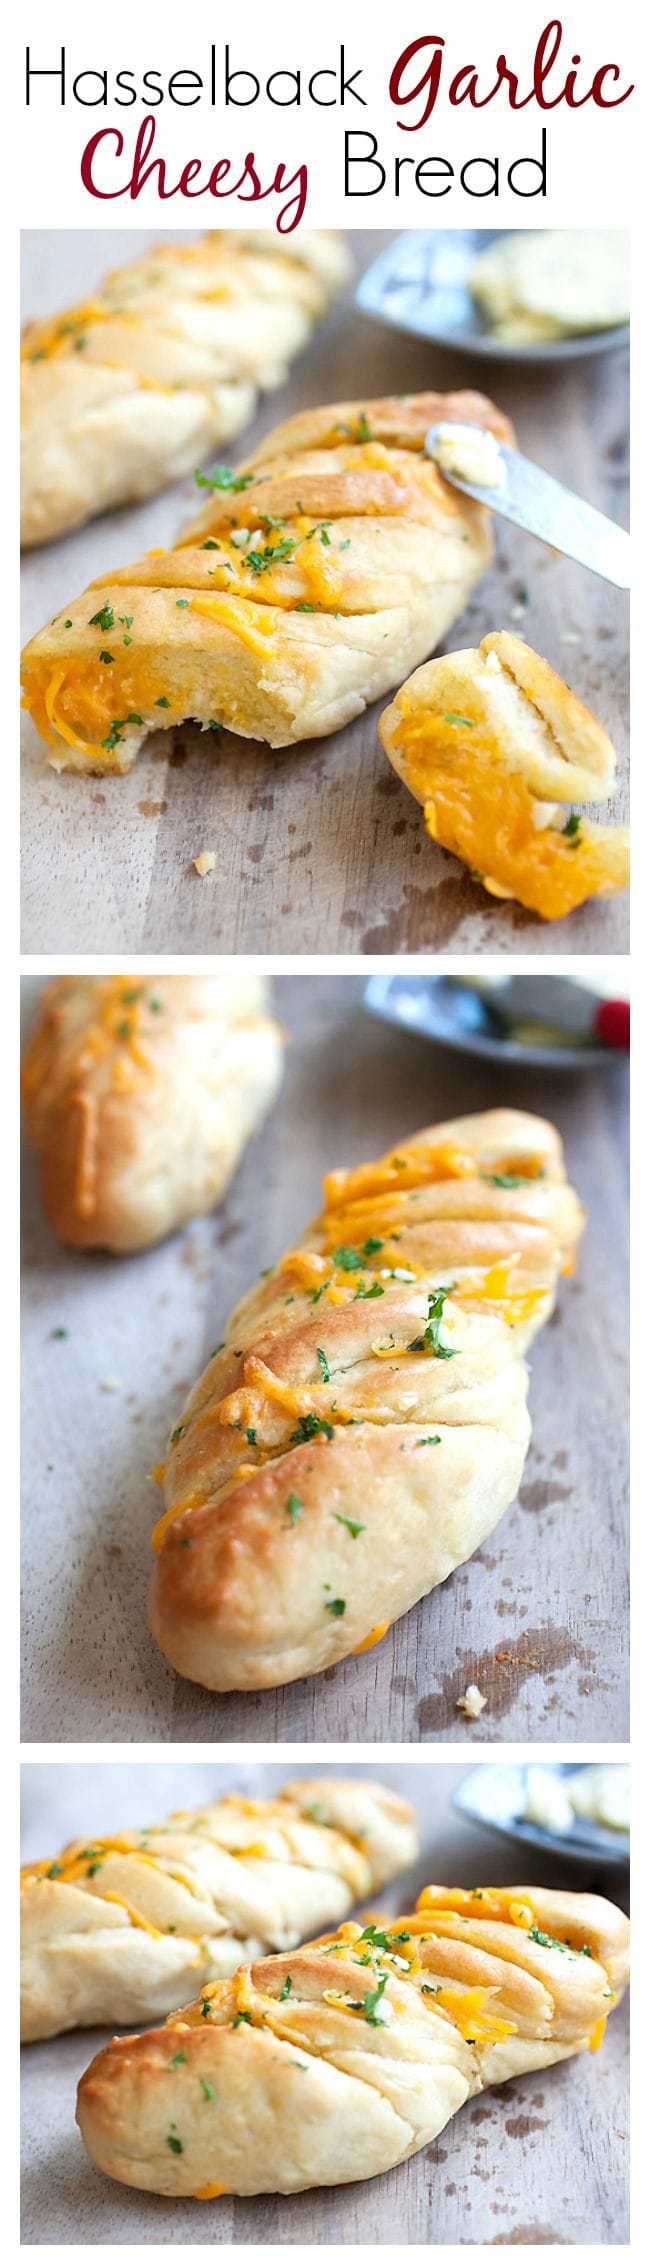 Hasselback Garlic Cheesy Bread - every slice is loaded with garlic and cheese, you just can't stop eating. | rasamalaysia.com